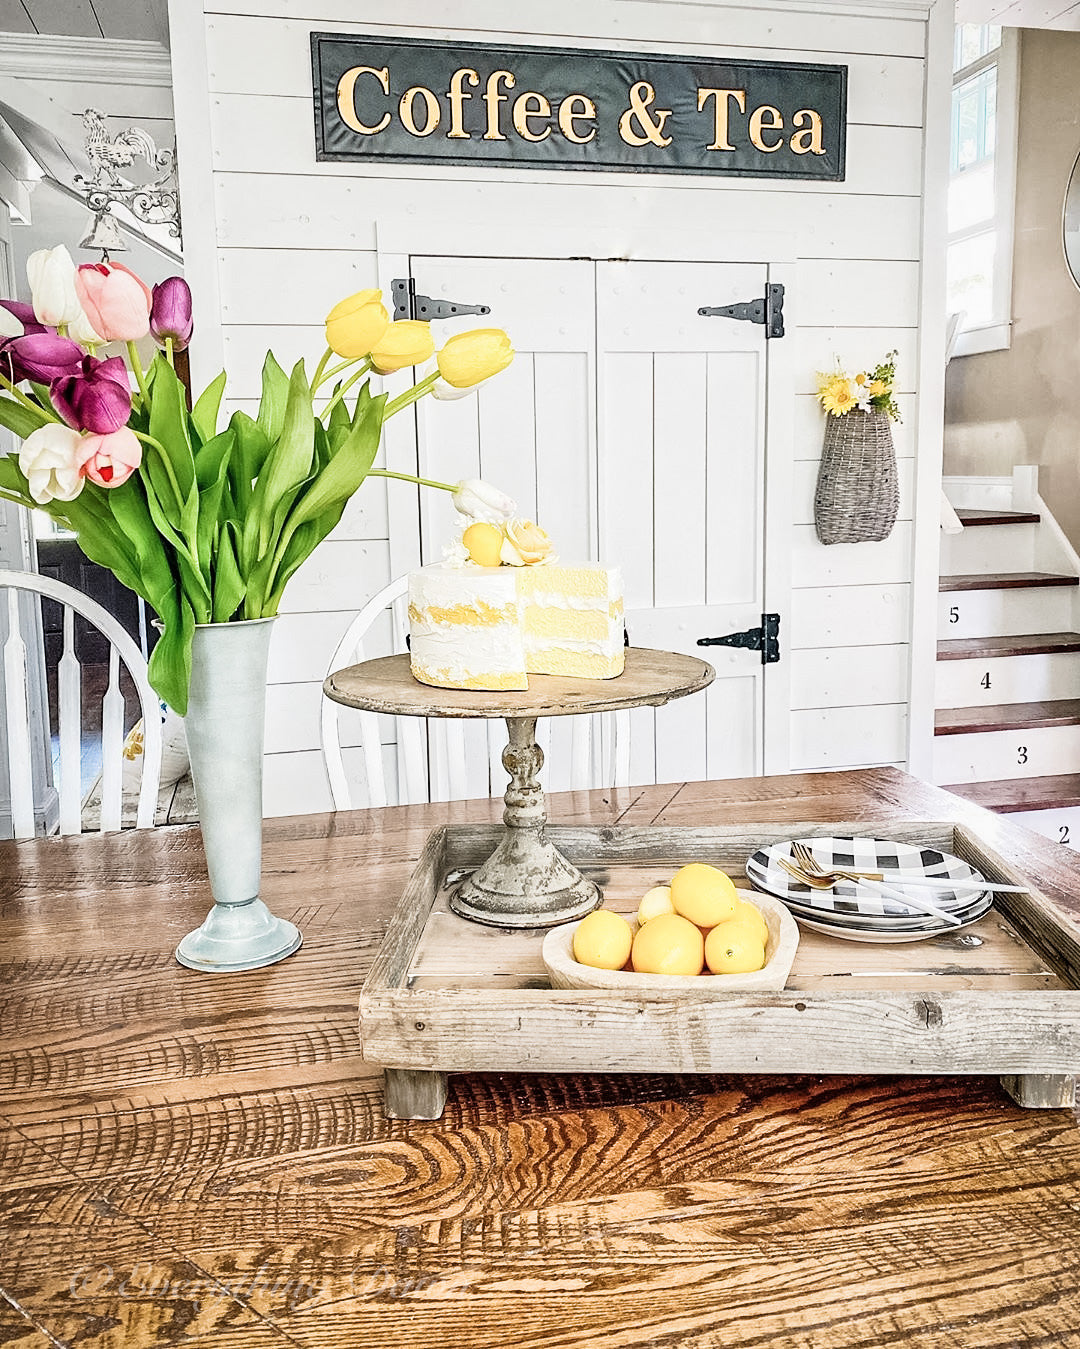 Faux lemon cake with pink and white tulips on wooden table